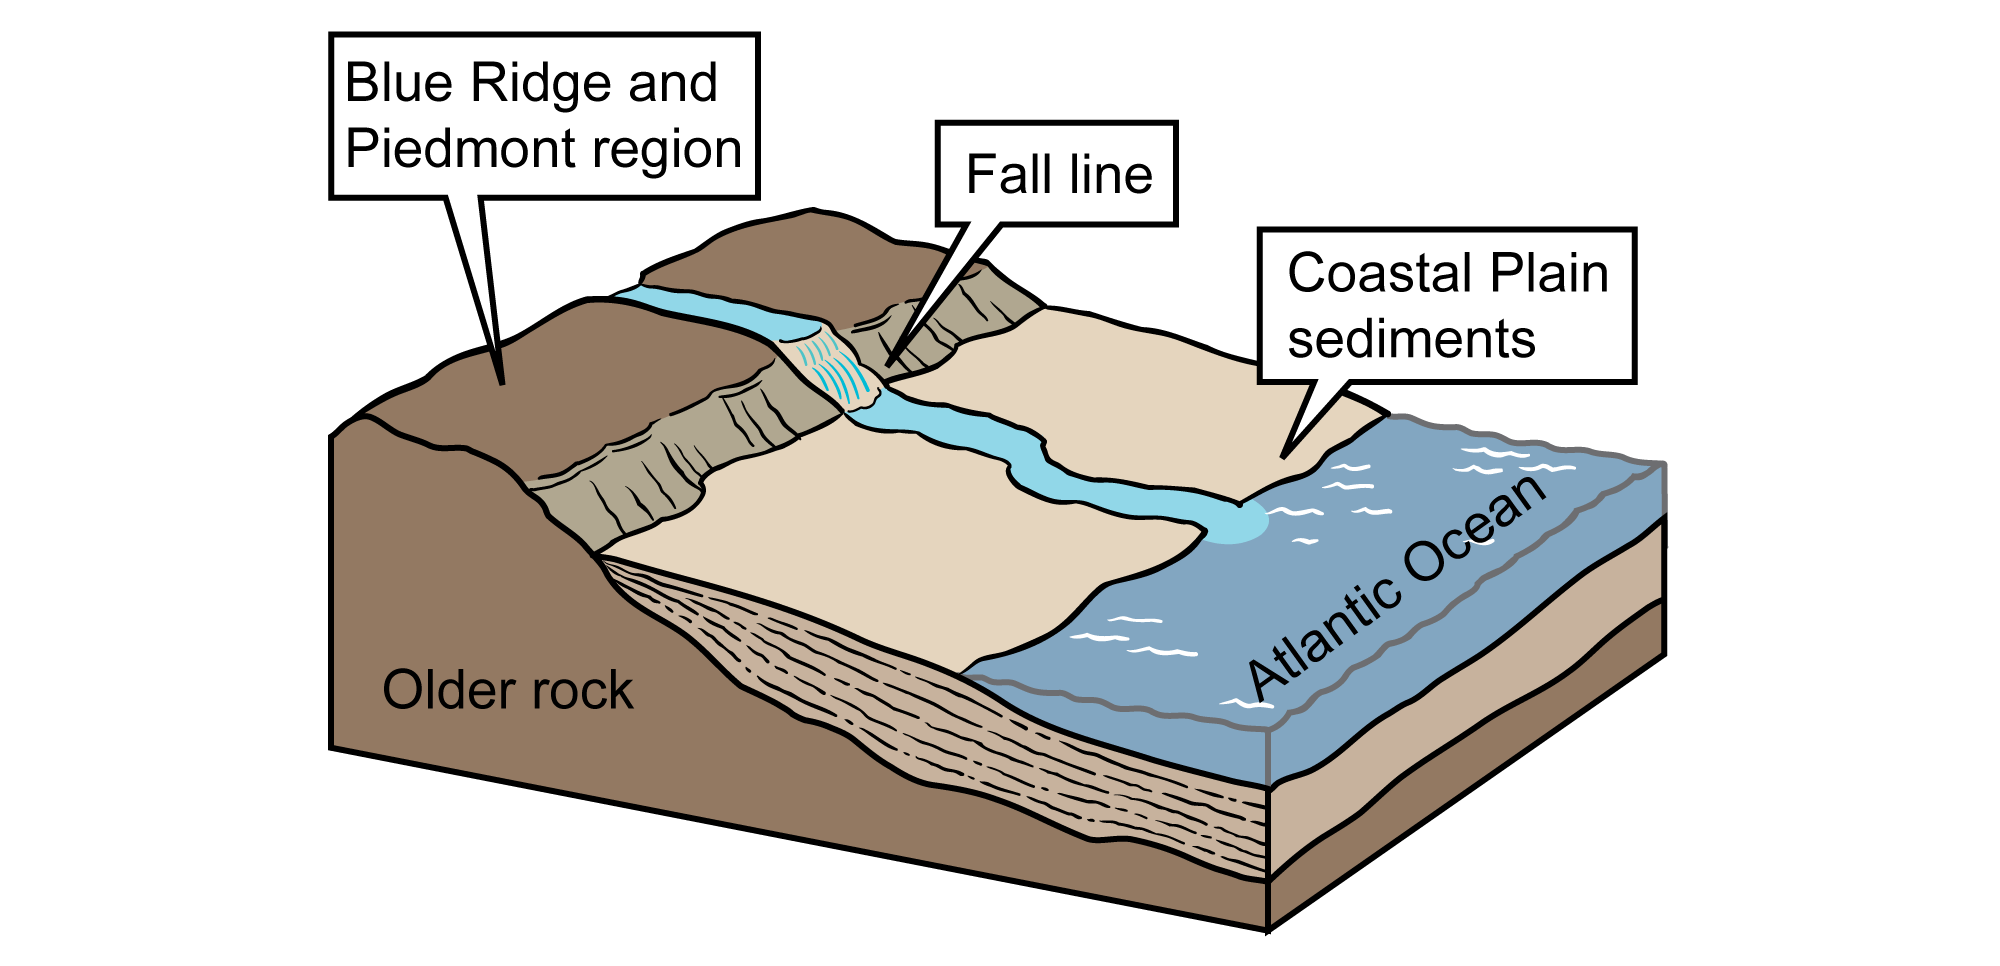 Diagram of the Fall Line on the Atlantic Coast. The Fall Line is a sudden drop in elevation between the Blue Ridge and Piedmont and the Atlantic Coastal Plain.